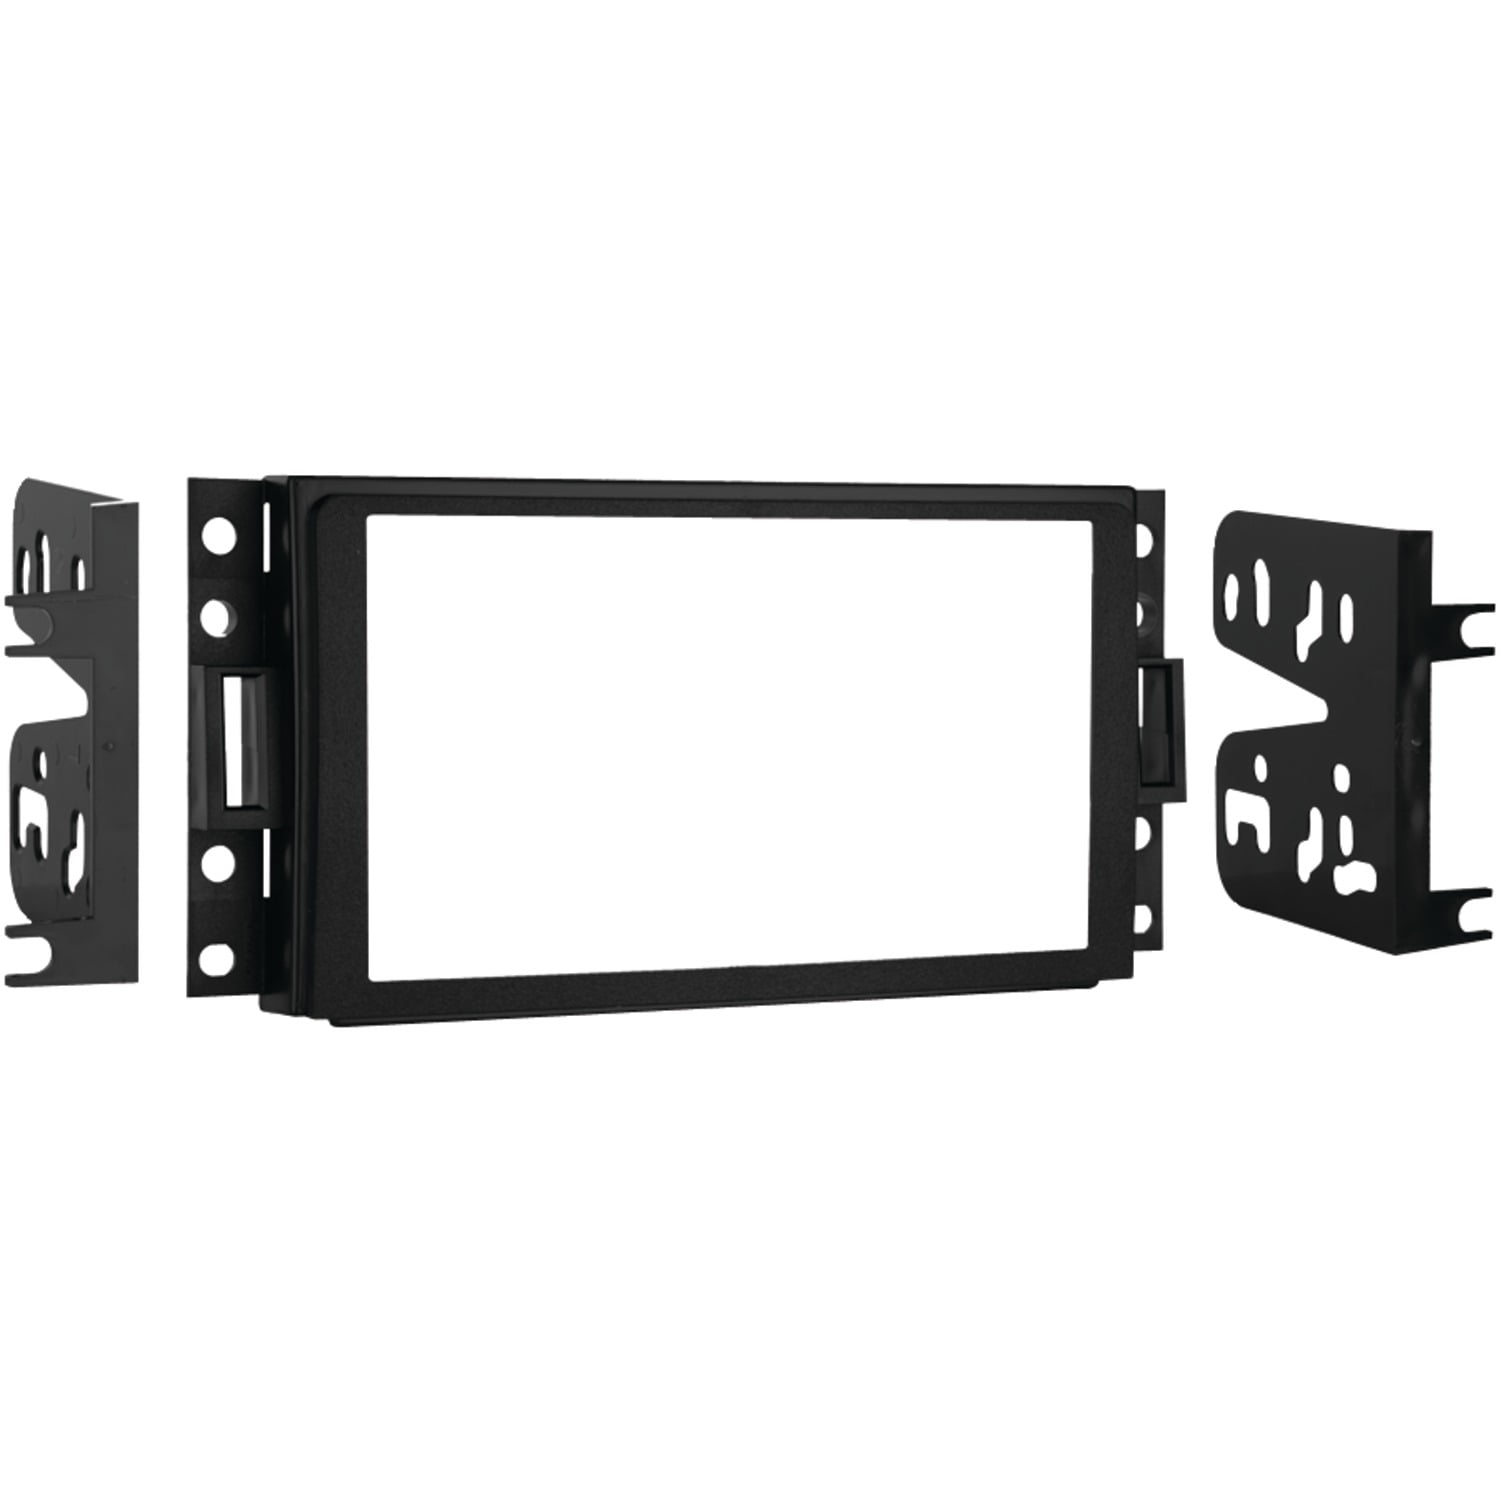 METRA 95-2001 GM DOUBLE DIN KIT FOR SELECT GM 1990-2012